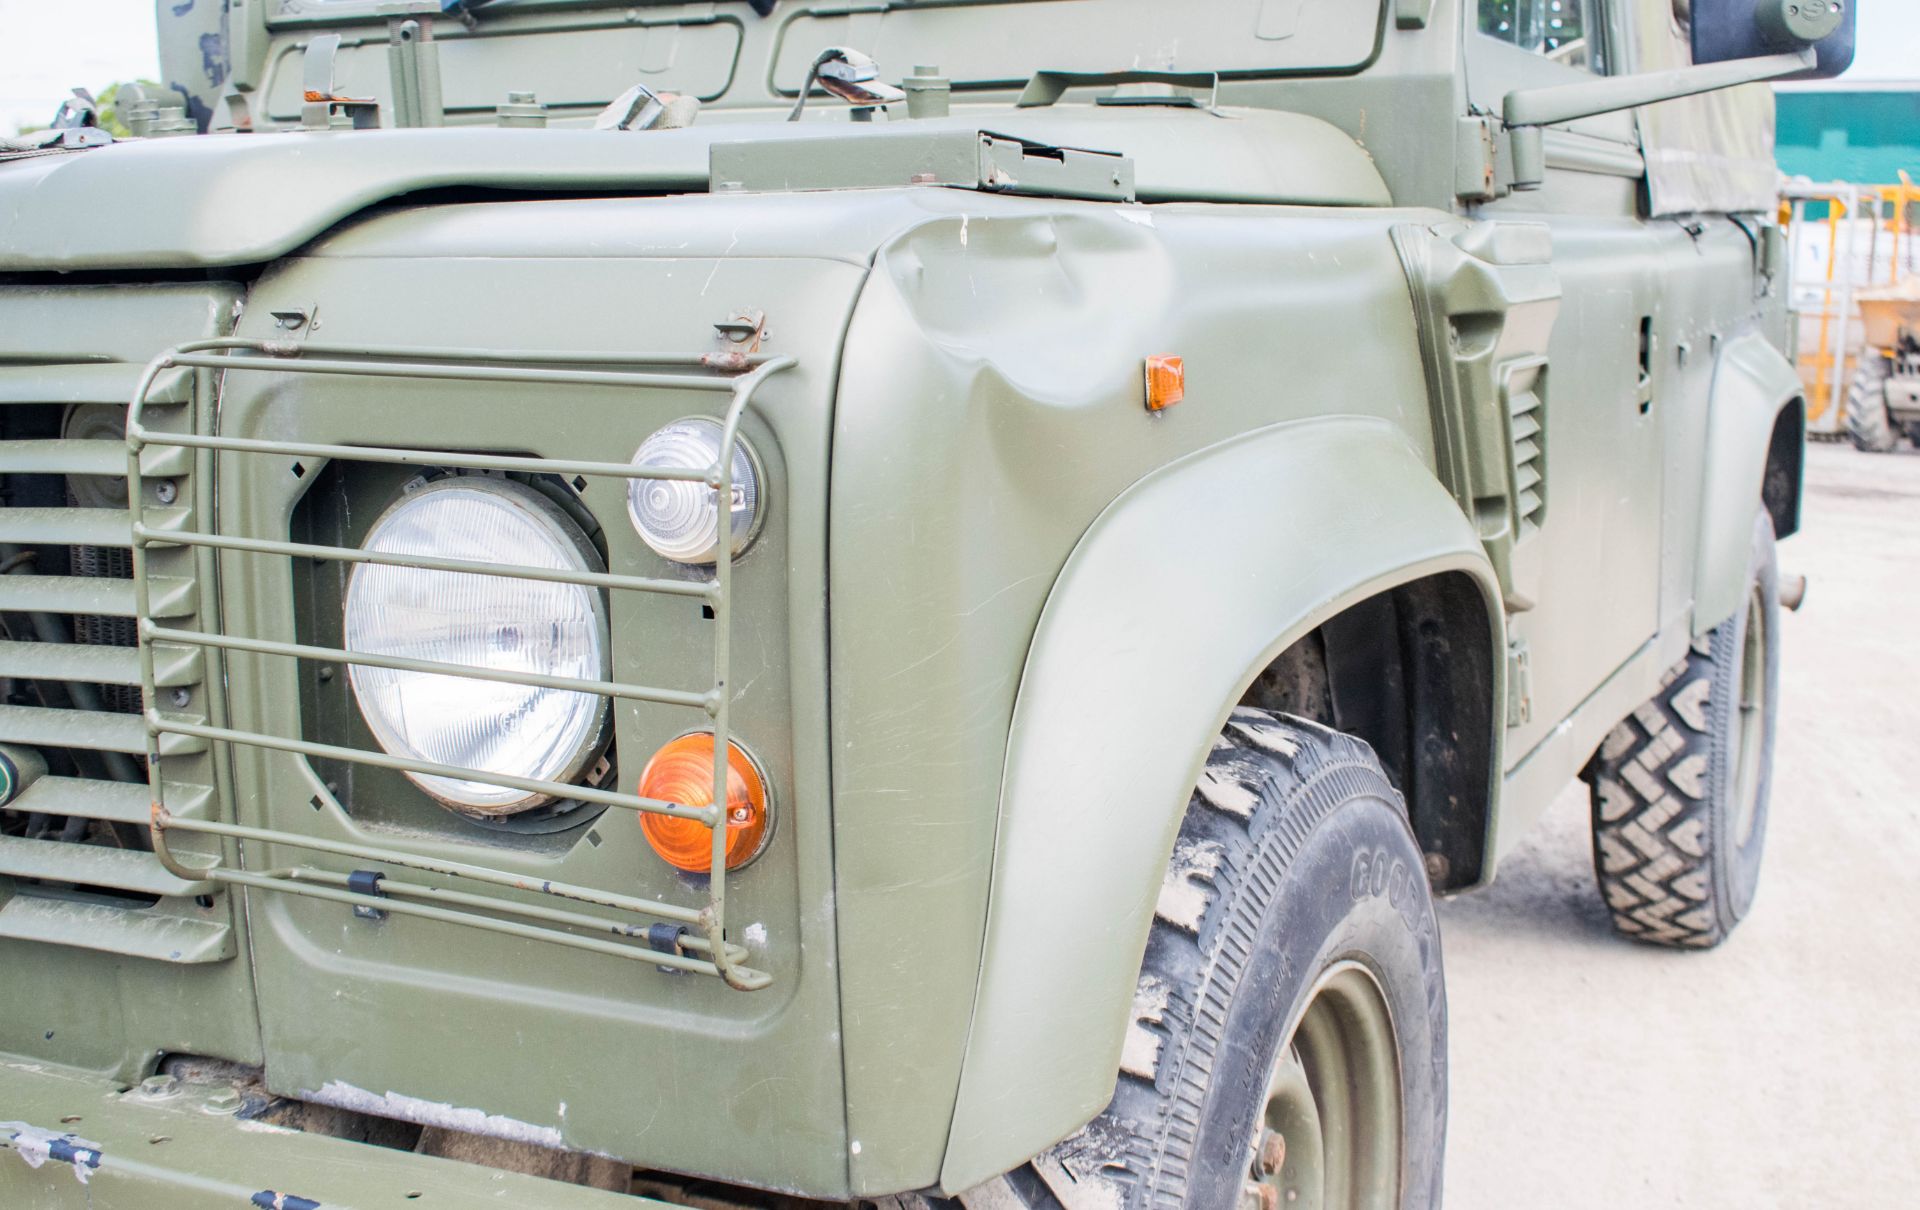 Land Rover Defender 90 Wolf 300 TDI 4wd soft top utility vehicle (EX MOD) Date into Service: 02/03/ - Image 9 of 21